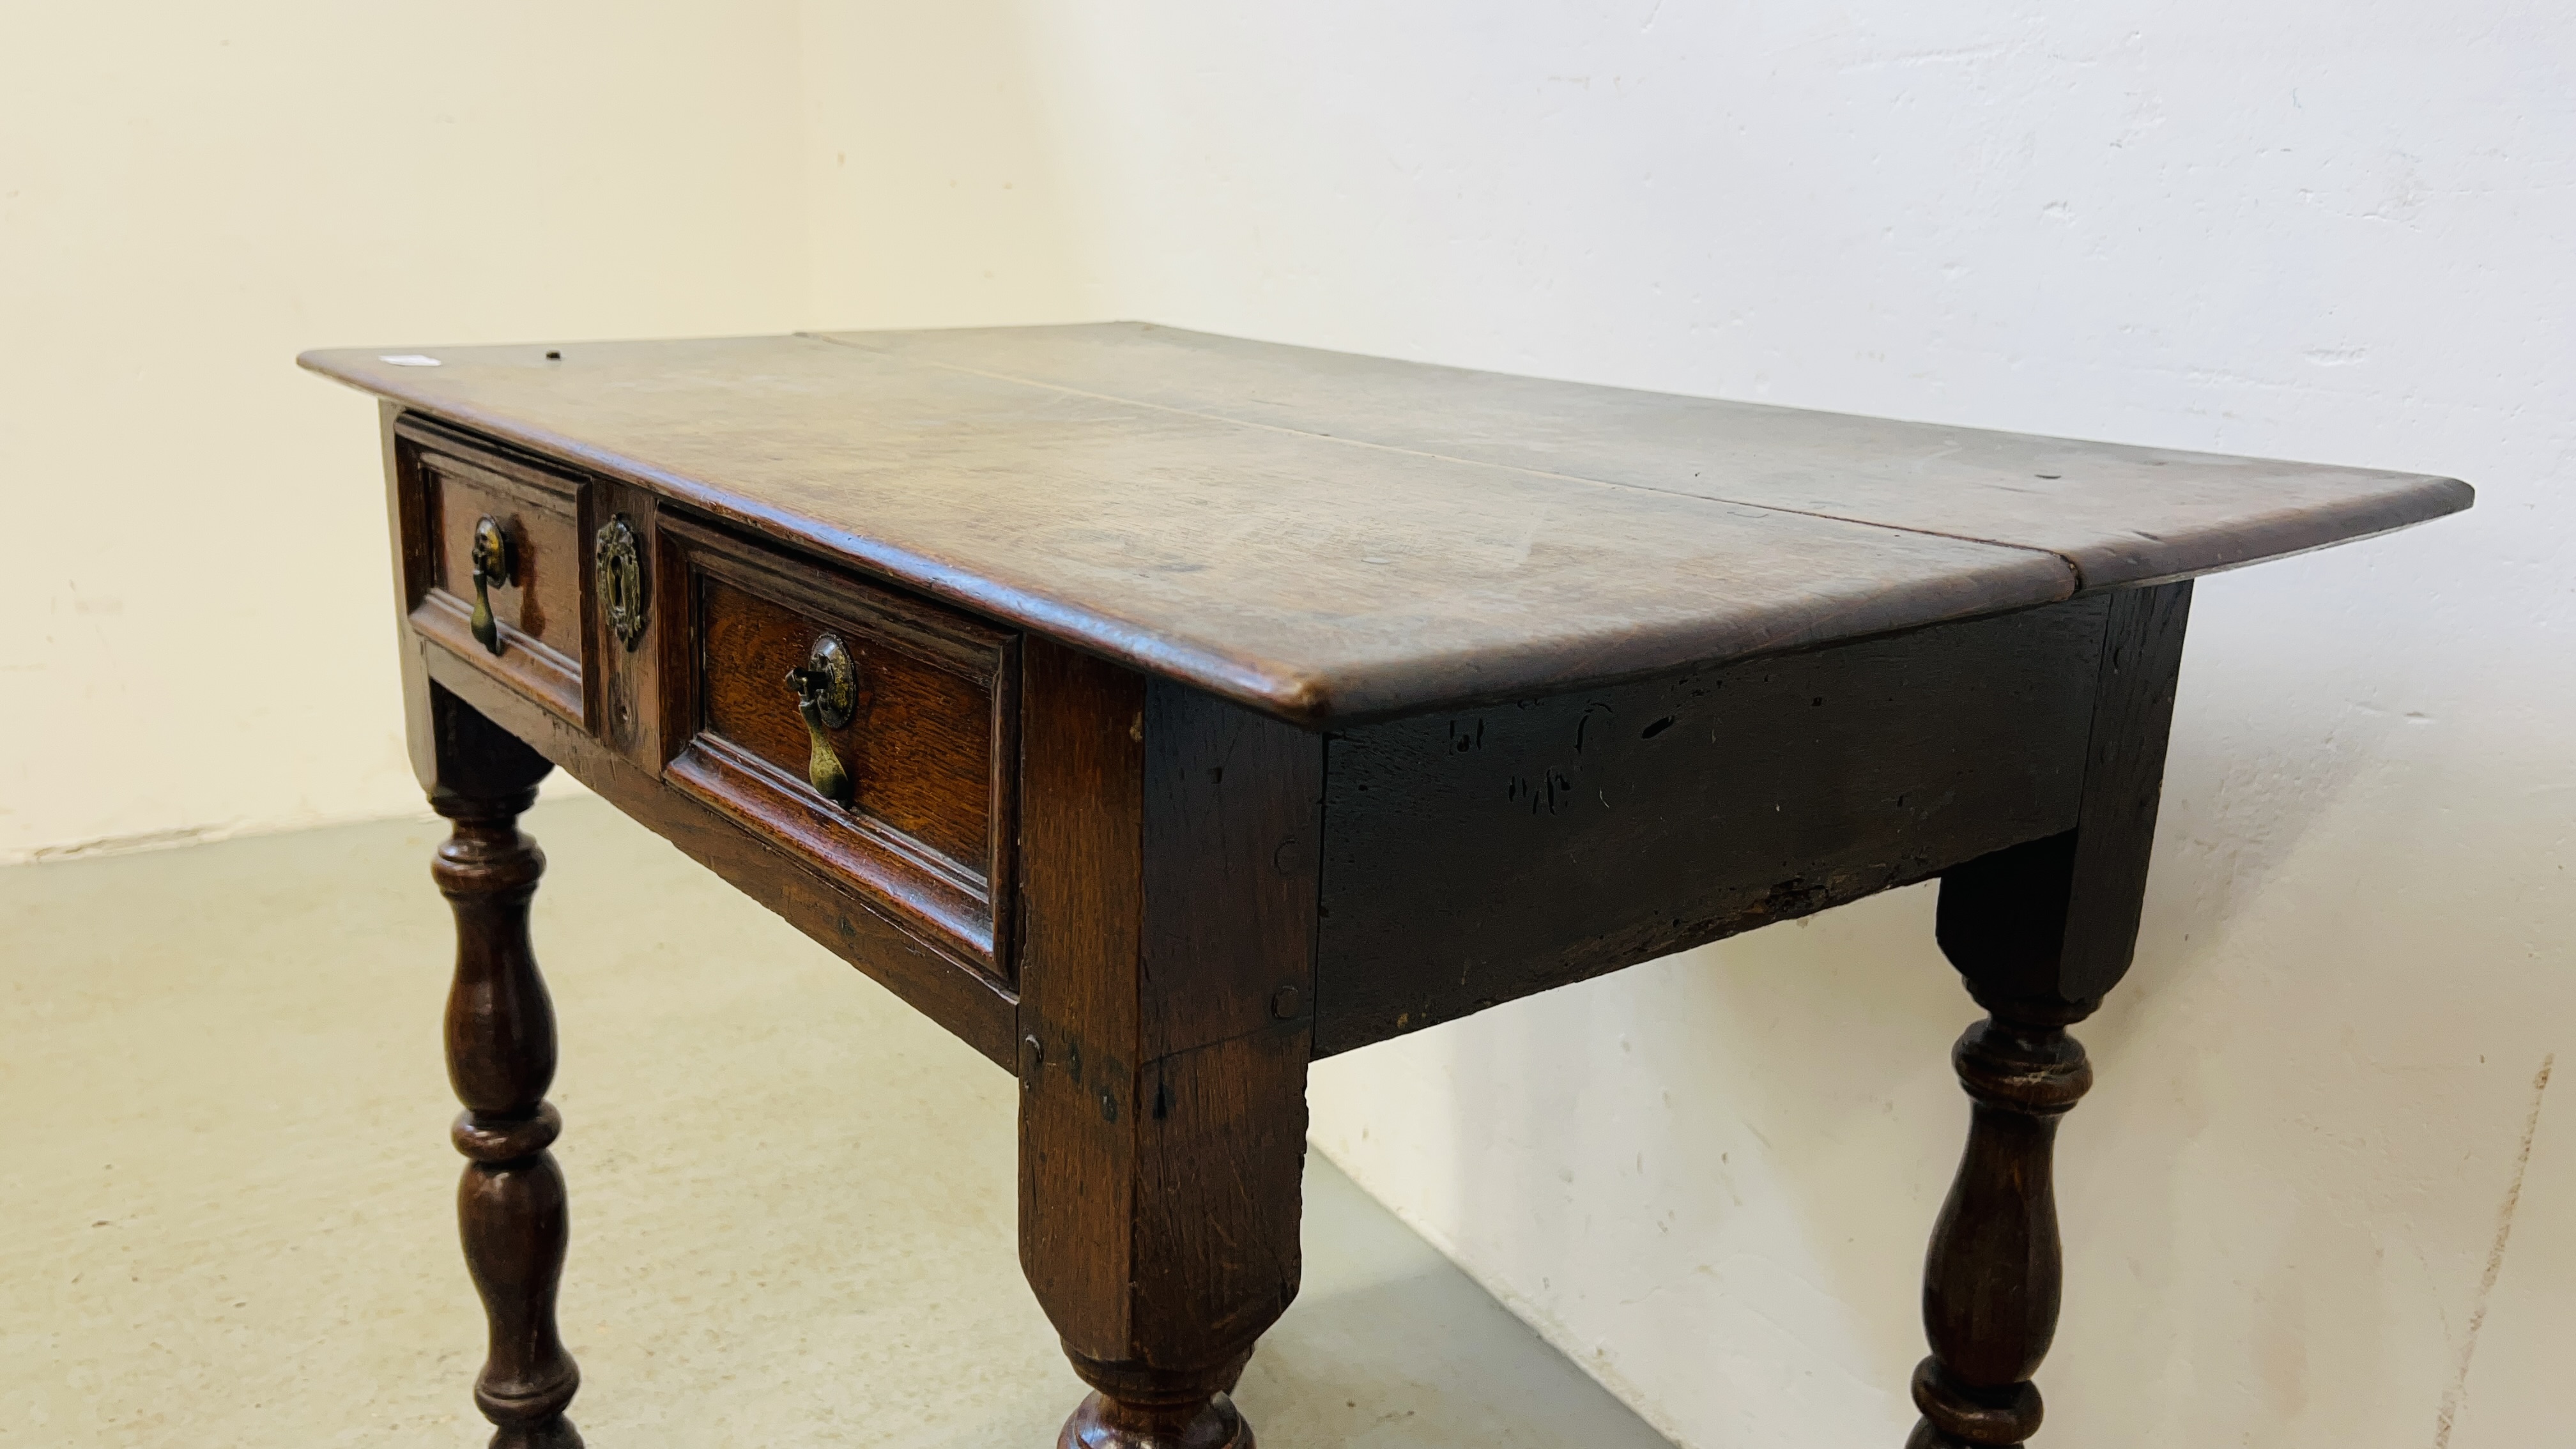 A LATE C17th OAK SINGLE DRAWER SIDE TABLE WITH A WAVY X STRETCHER, W 88CM. - Image 3 of 15